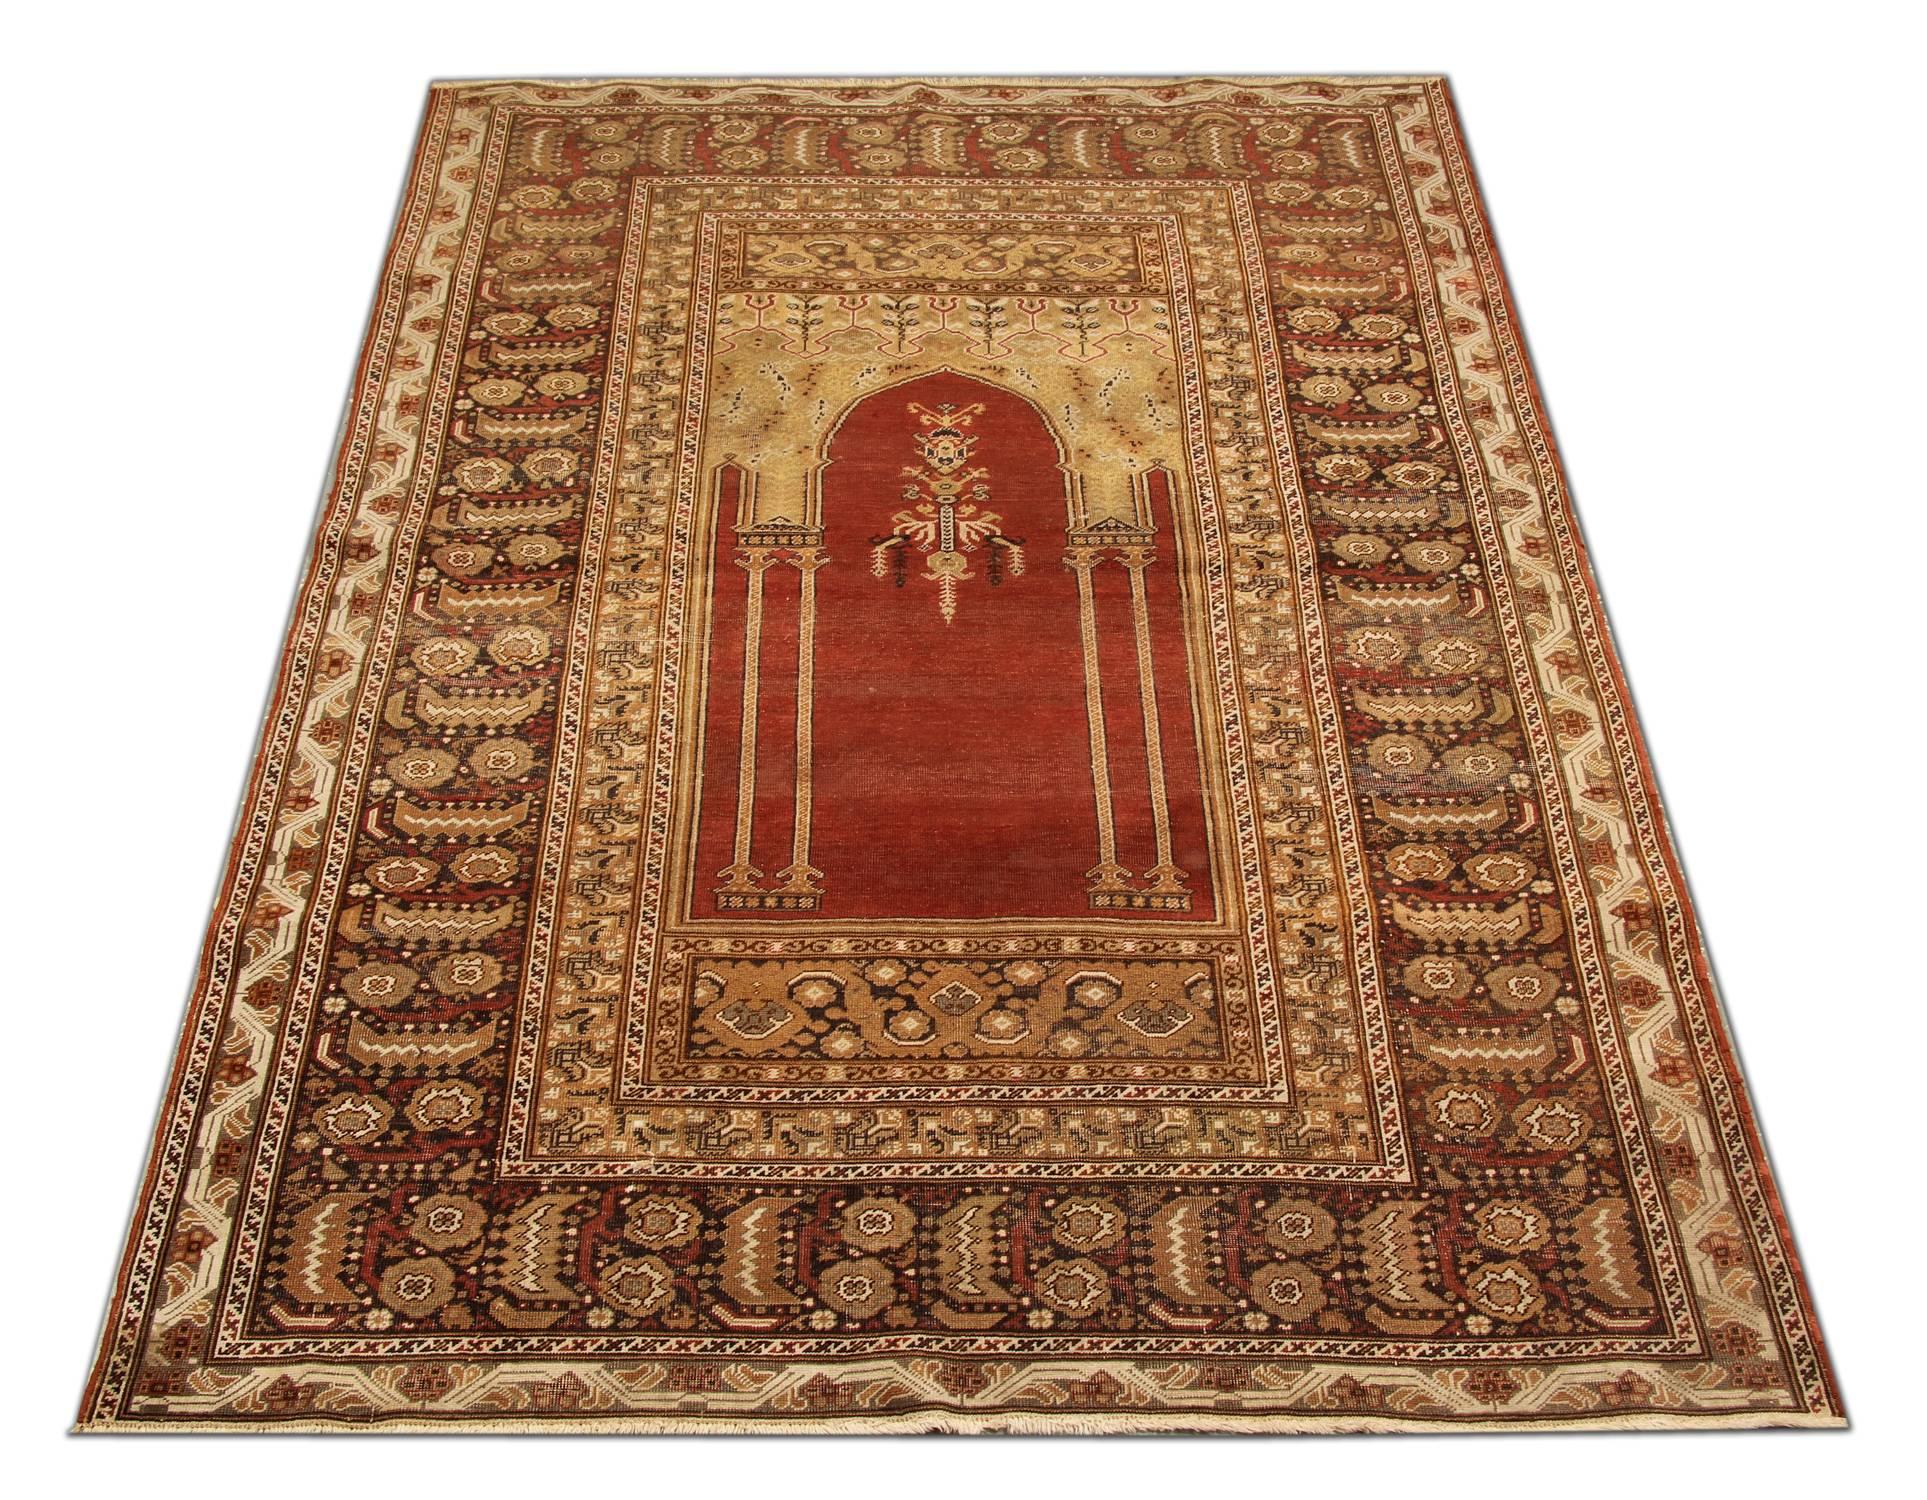 This design of the Turkish carpets is most distinctive and is known as prayer designs for over a thousand years. One can find the connotation of the design back to ancient, where the architectural plan was coined and implemented by designers for the